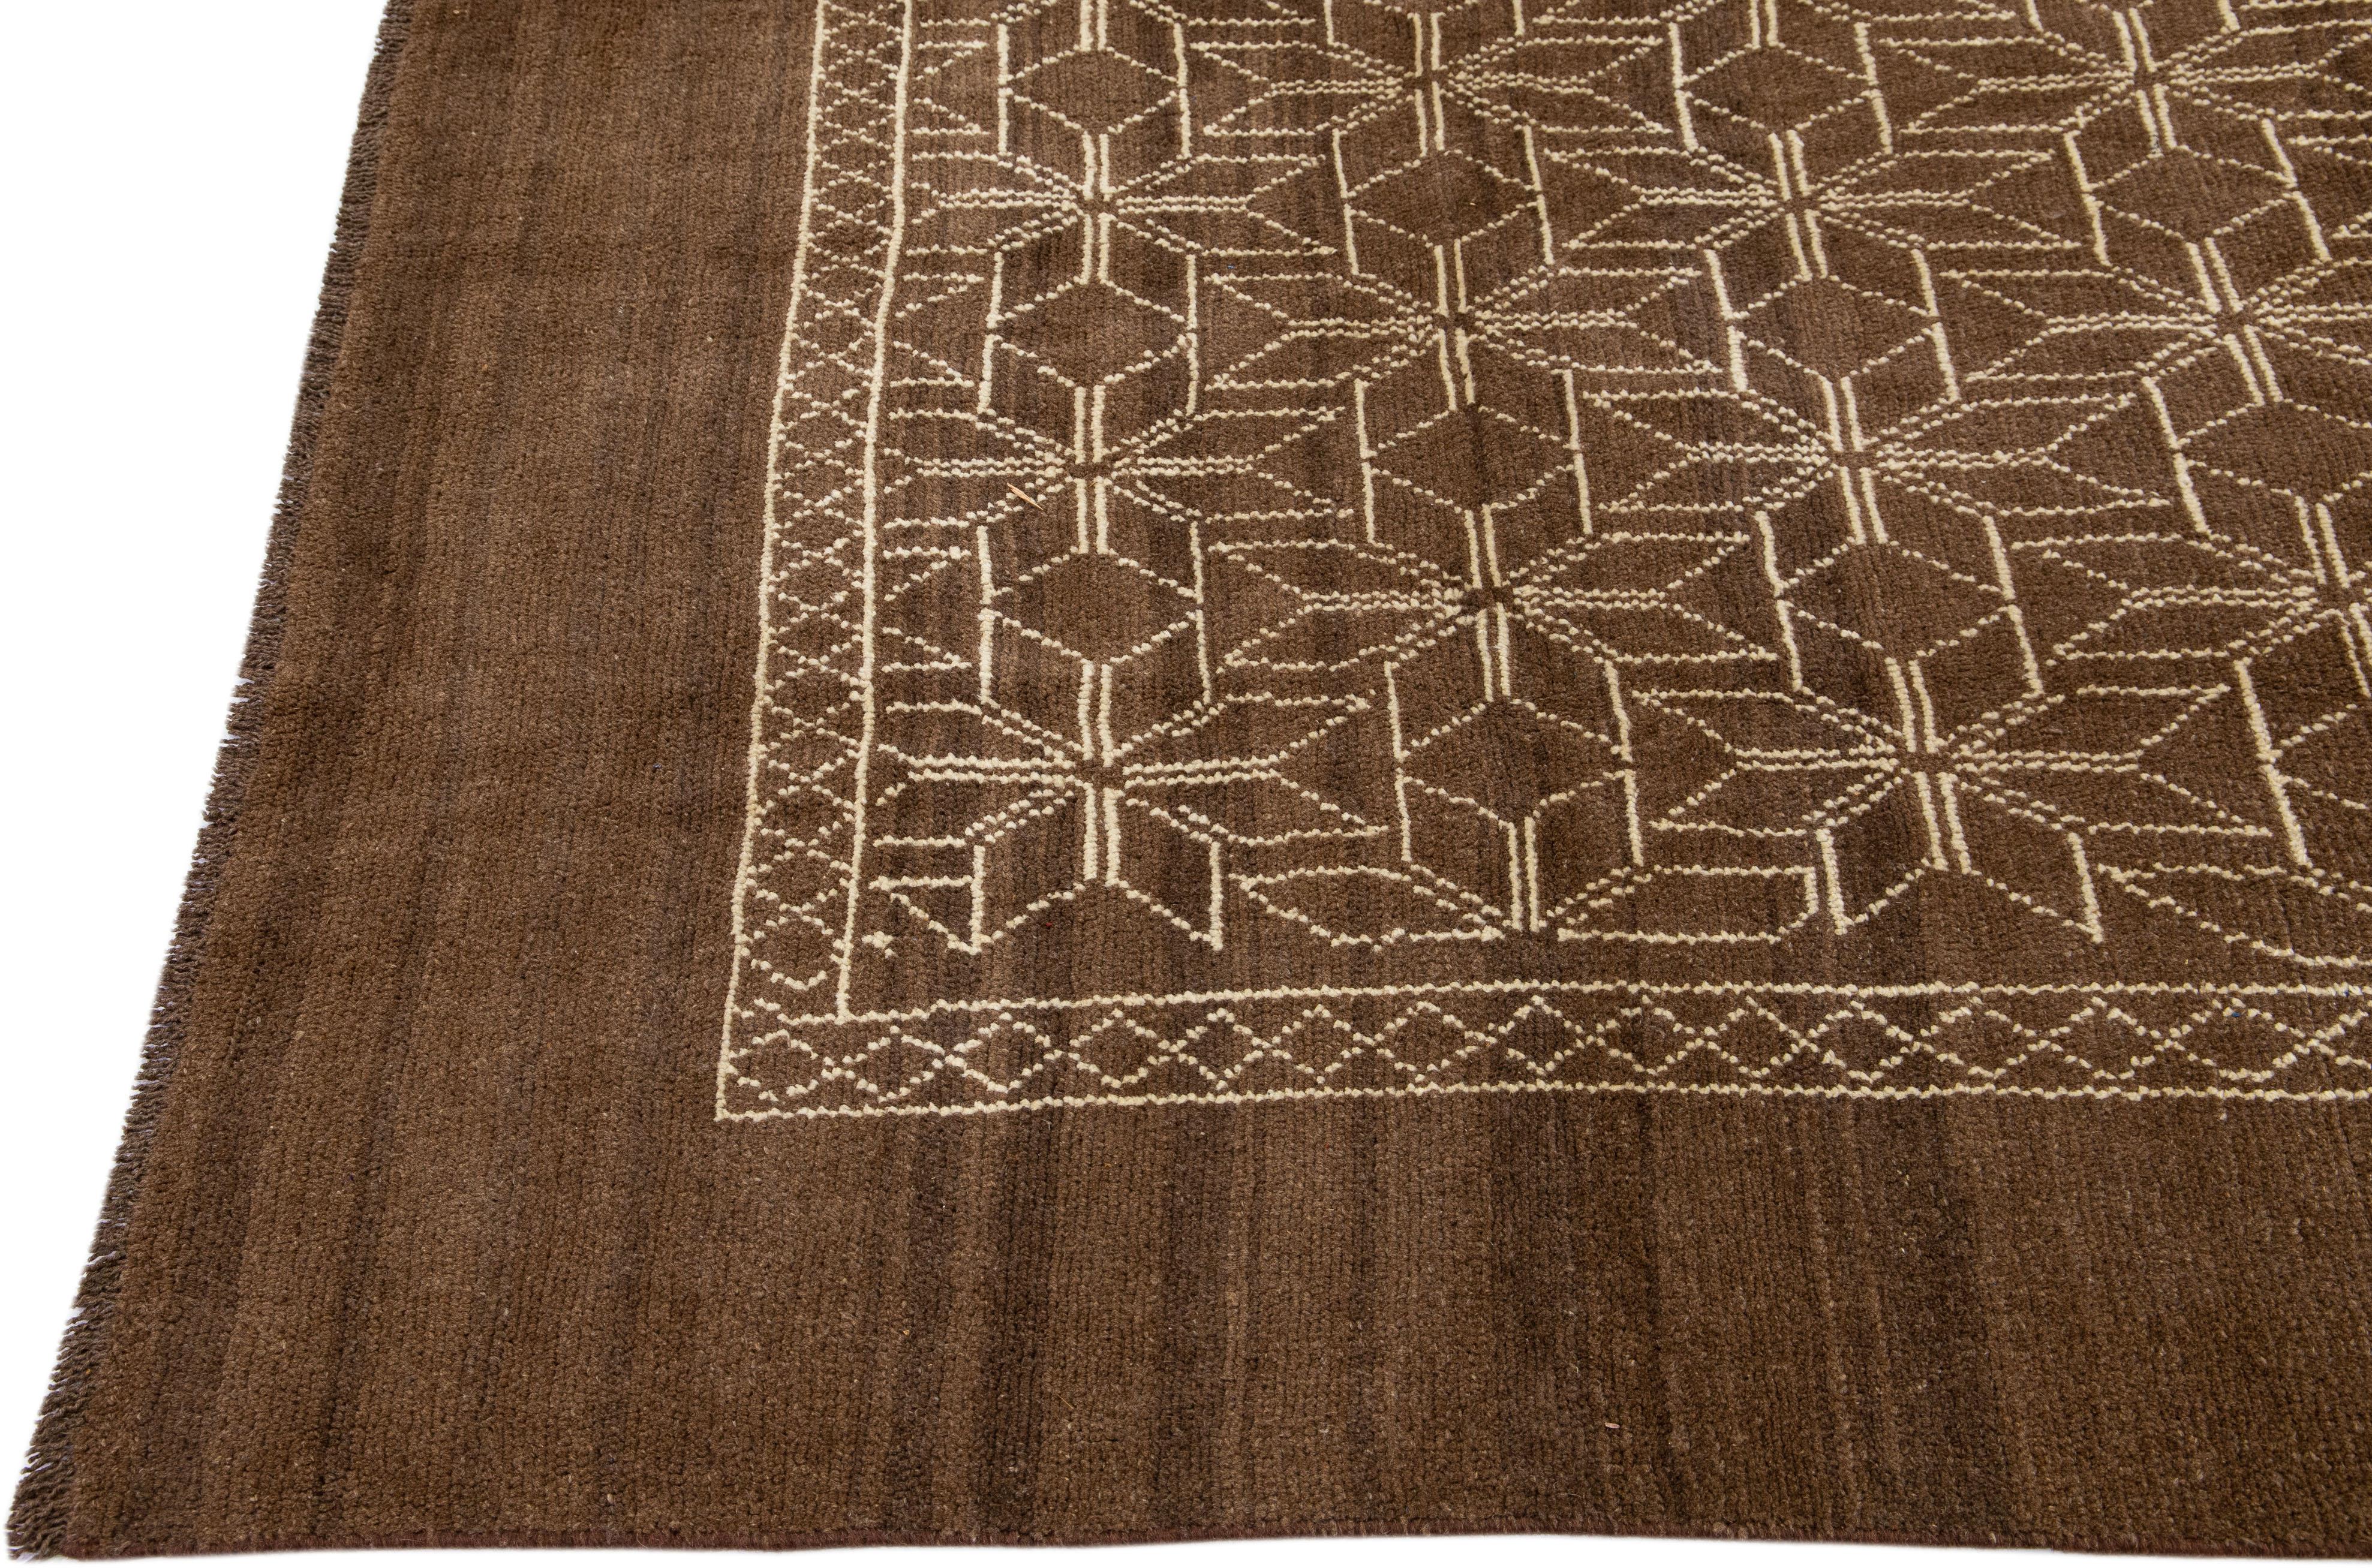 Brown Modern Moroccan Style Handmade Geometric Designed Wool Rug by Apadana In New Condition For Sale In Norwalk, CT